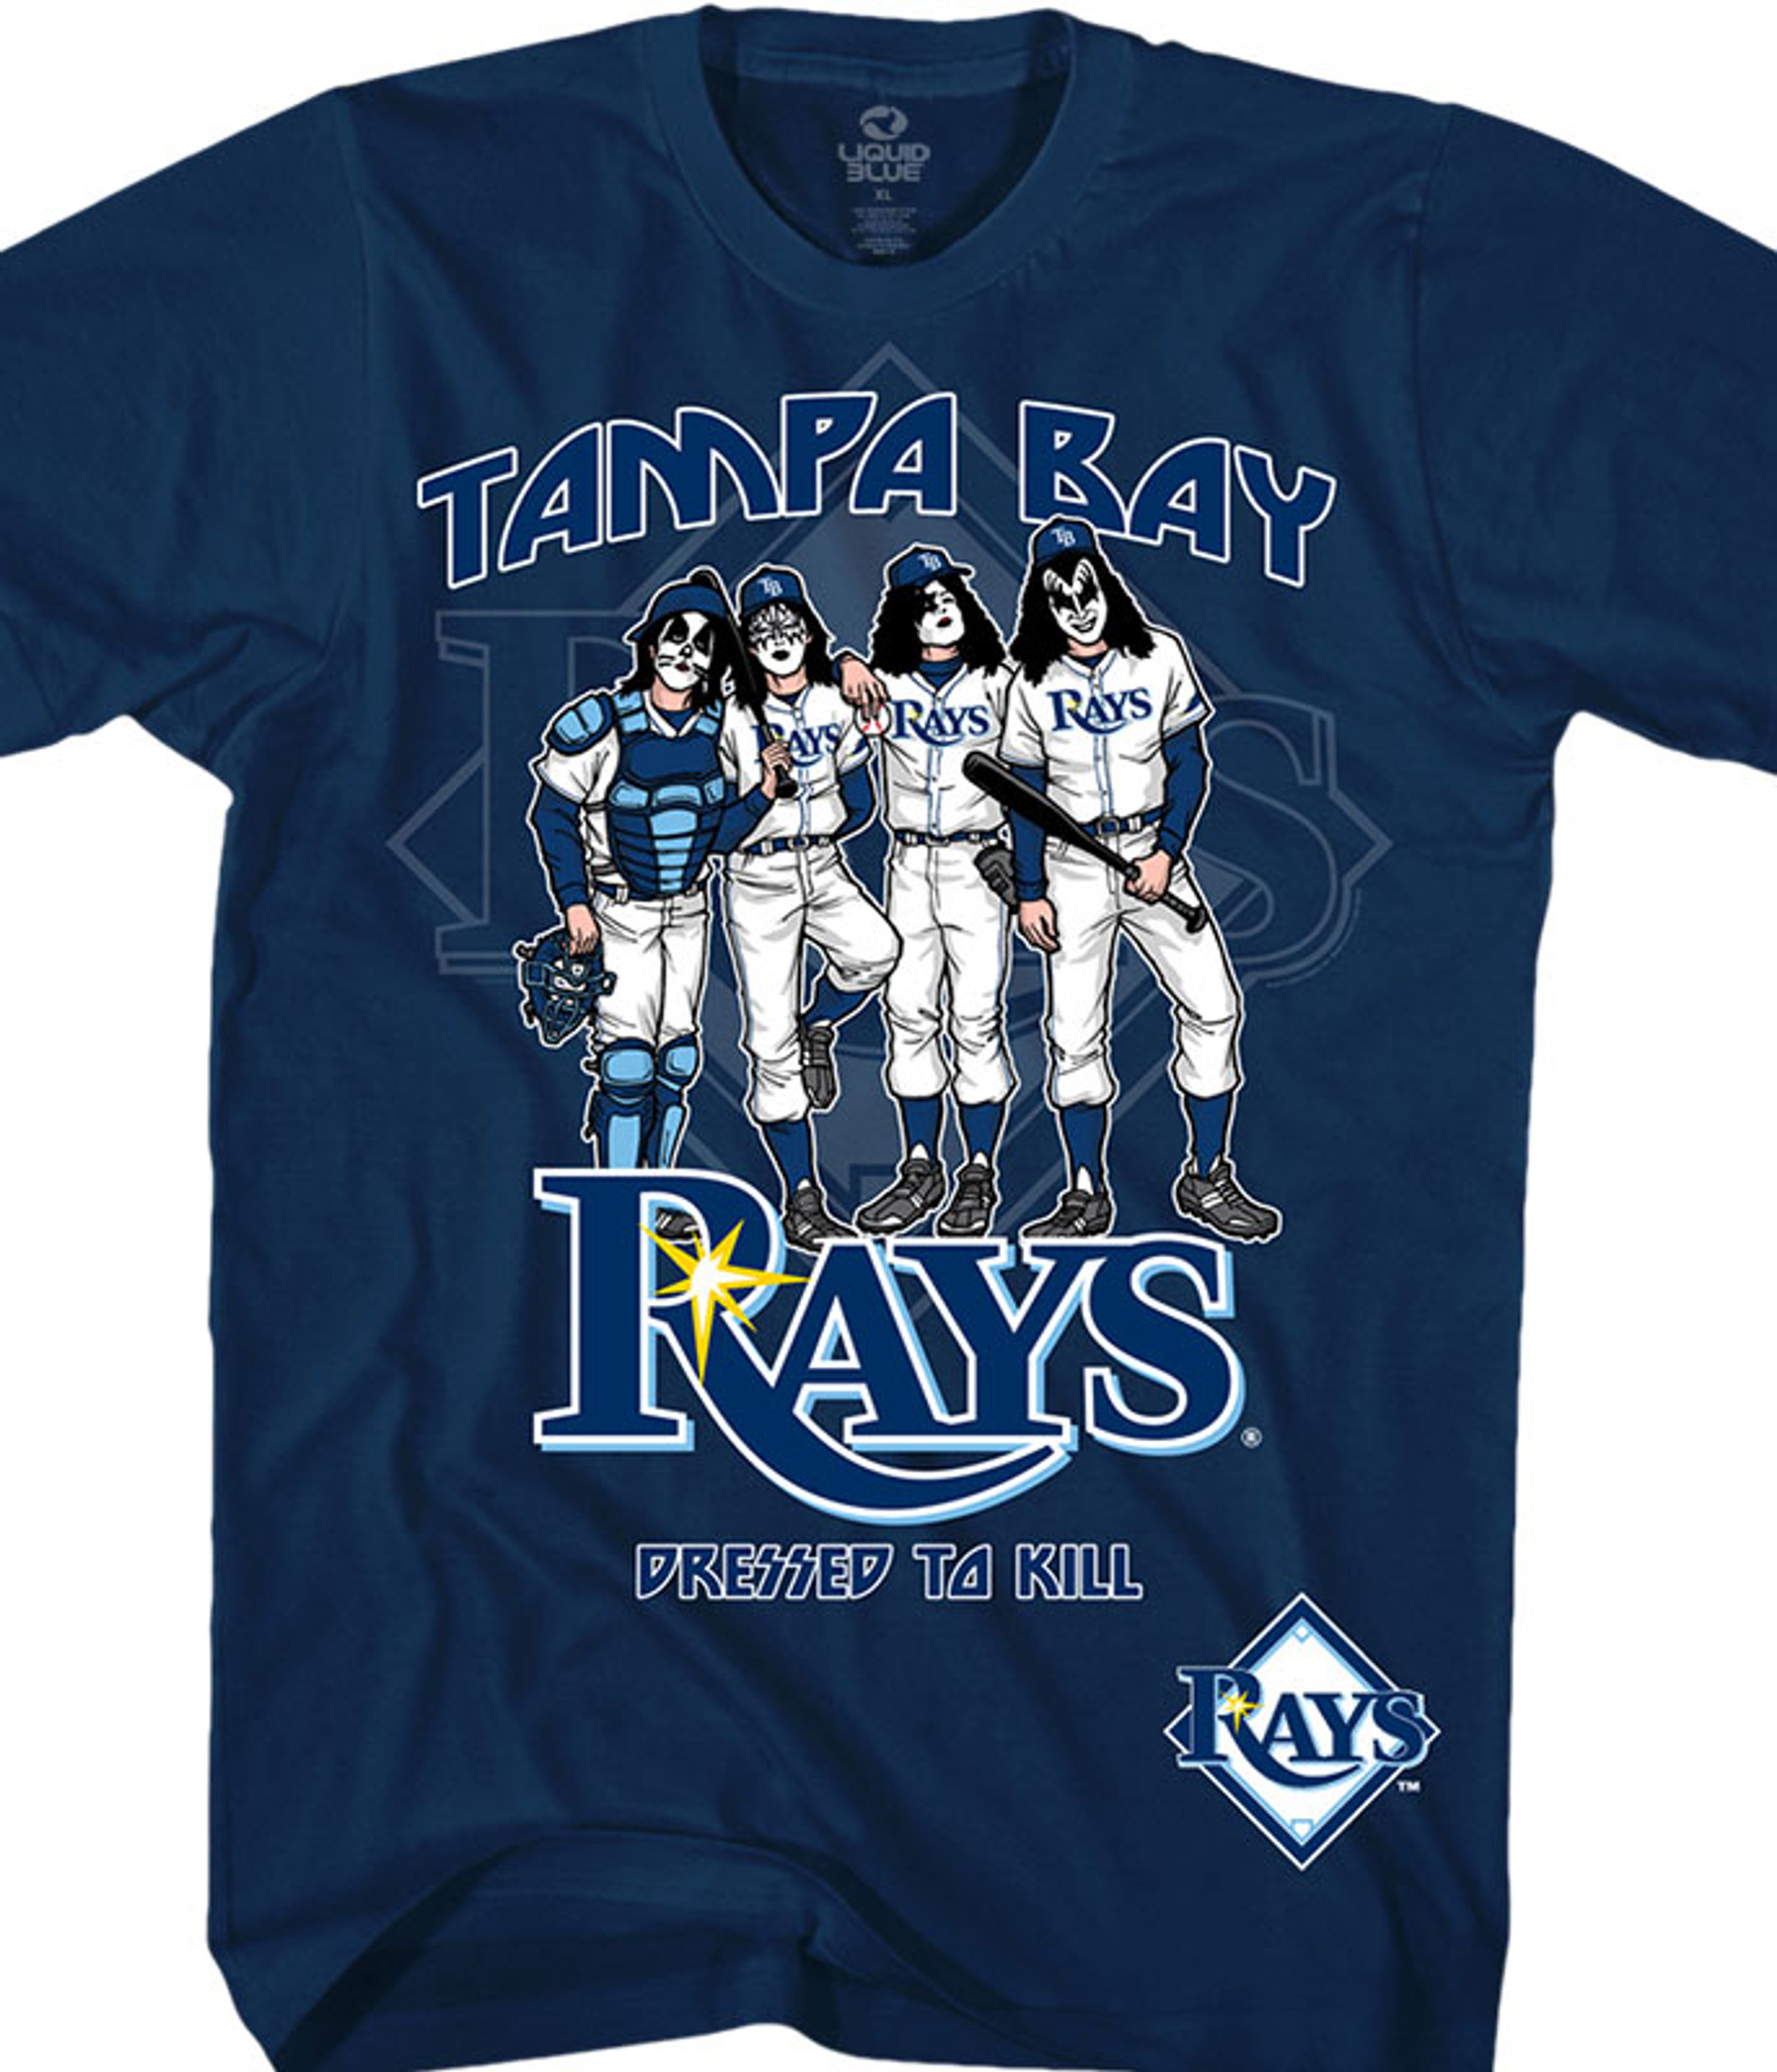 Tampa Bay Rays T-Shirt Size 2XL Women's MLB~ Pink New with Tags!